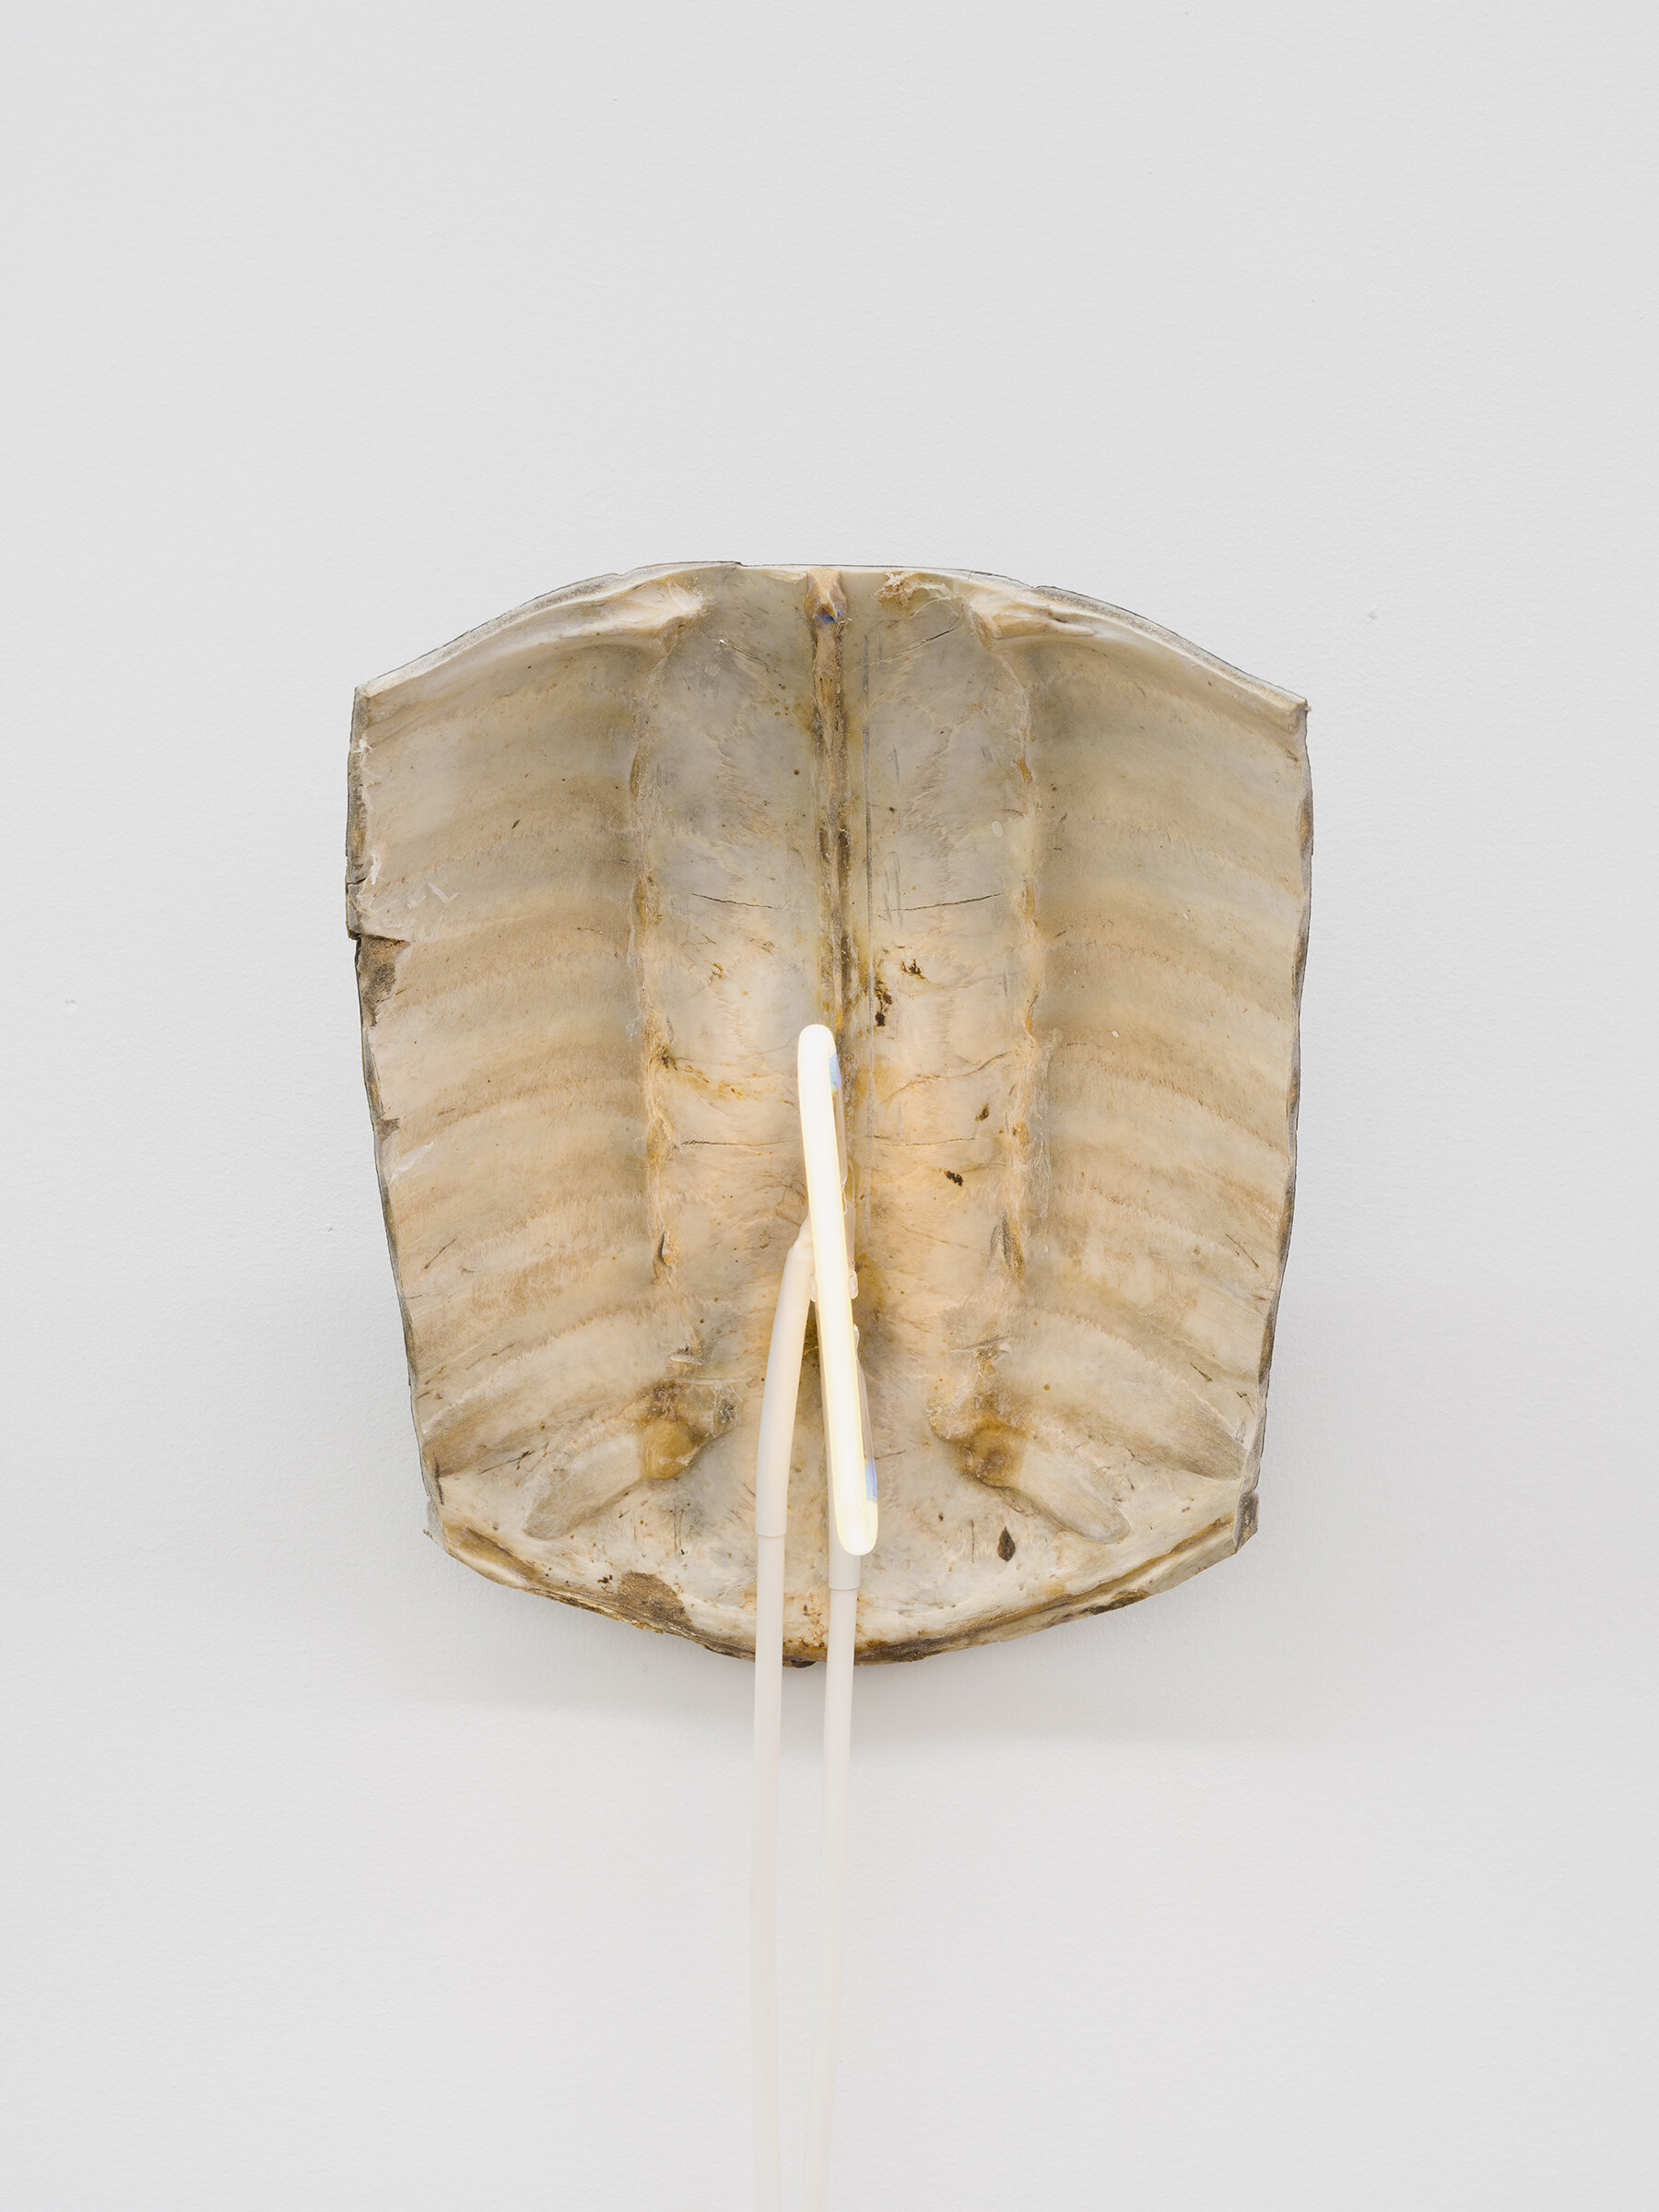  Sean Donovan  Control Command Delete 3 , 2020 snapping turtle shell, neon, glass tubing, silicon wire,  transformer, acrylic tube support, hardware 12 x 8 1⁄2 x 6 inches (31 x 22 x 15 cm) 